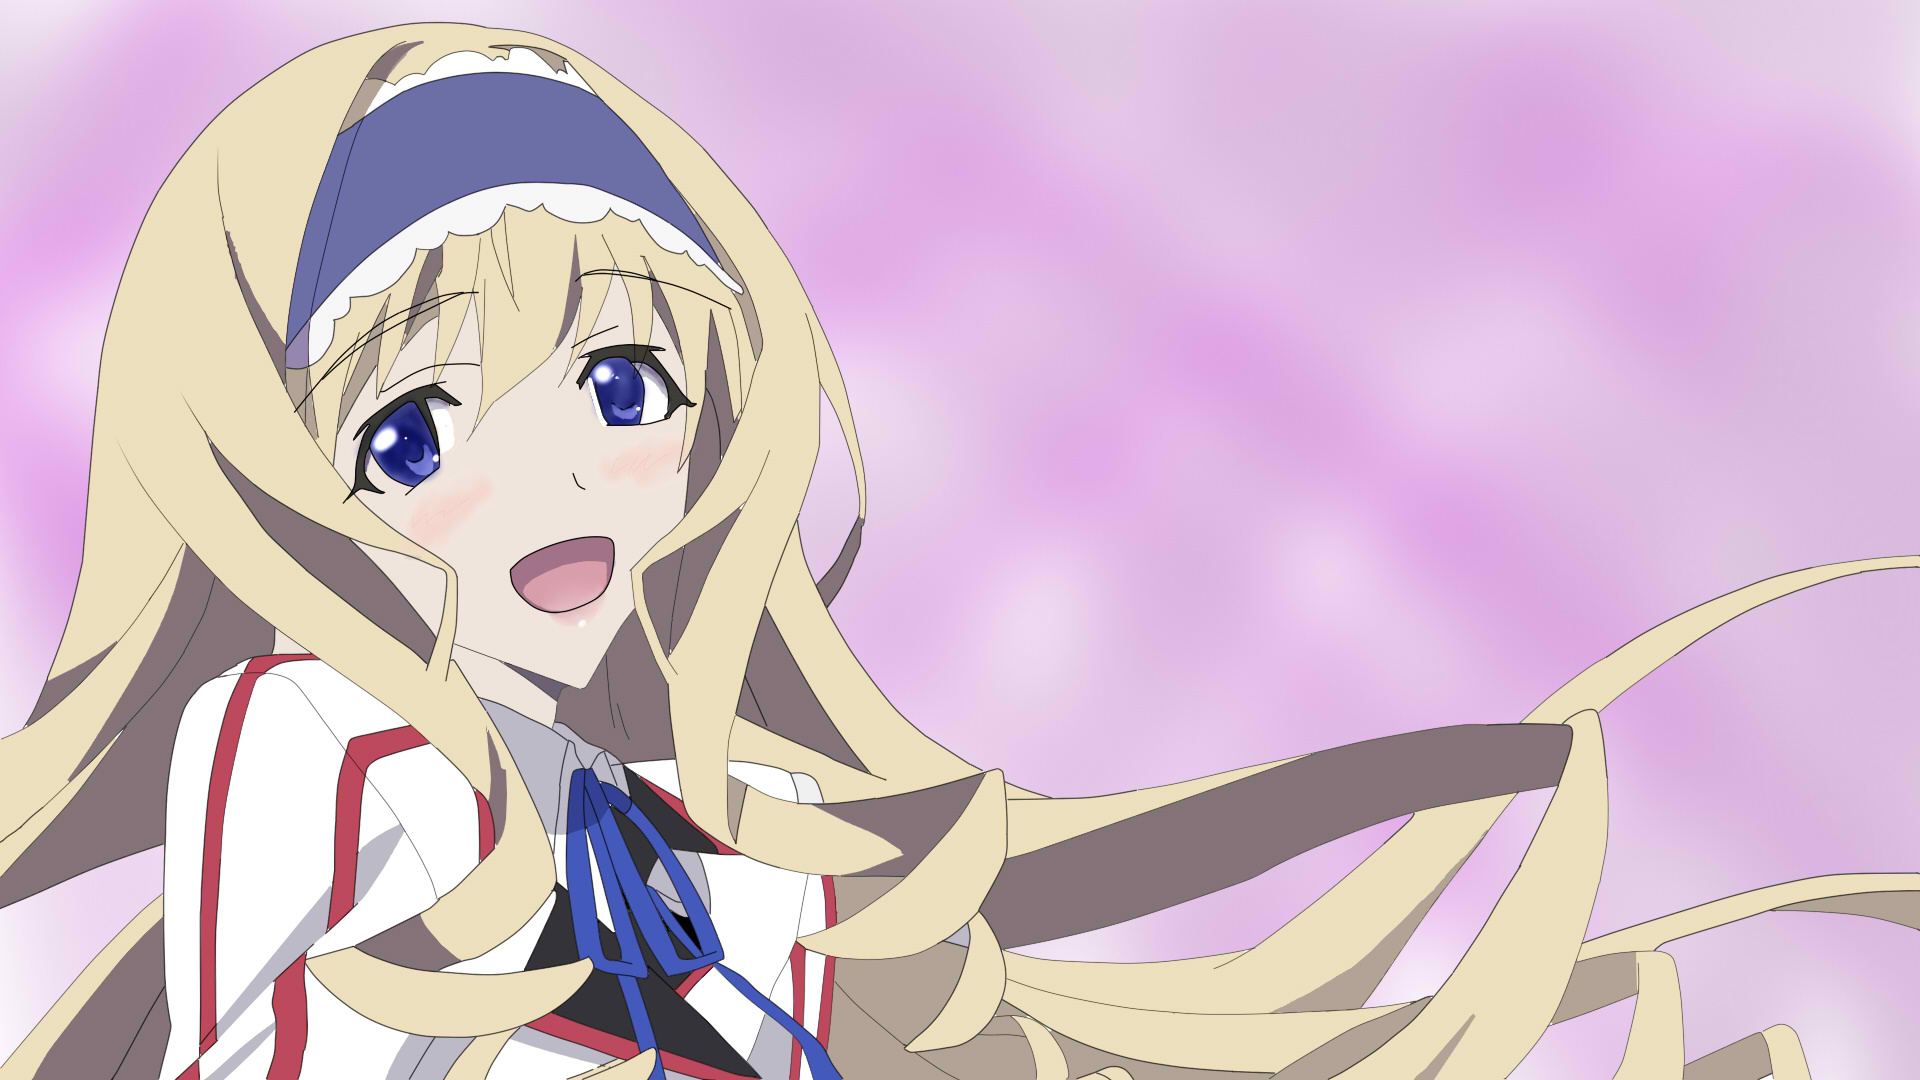 IS Infinite Stratos, Anime pictures, 1920x1080 Full HD Desktop